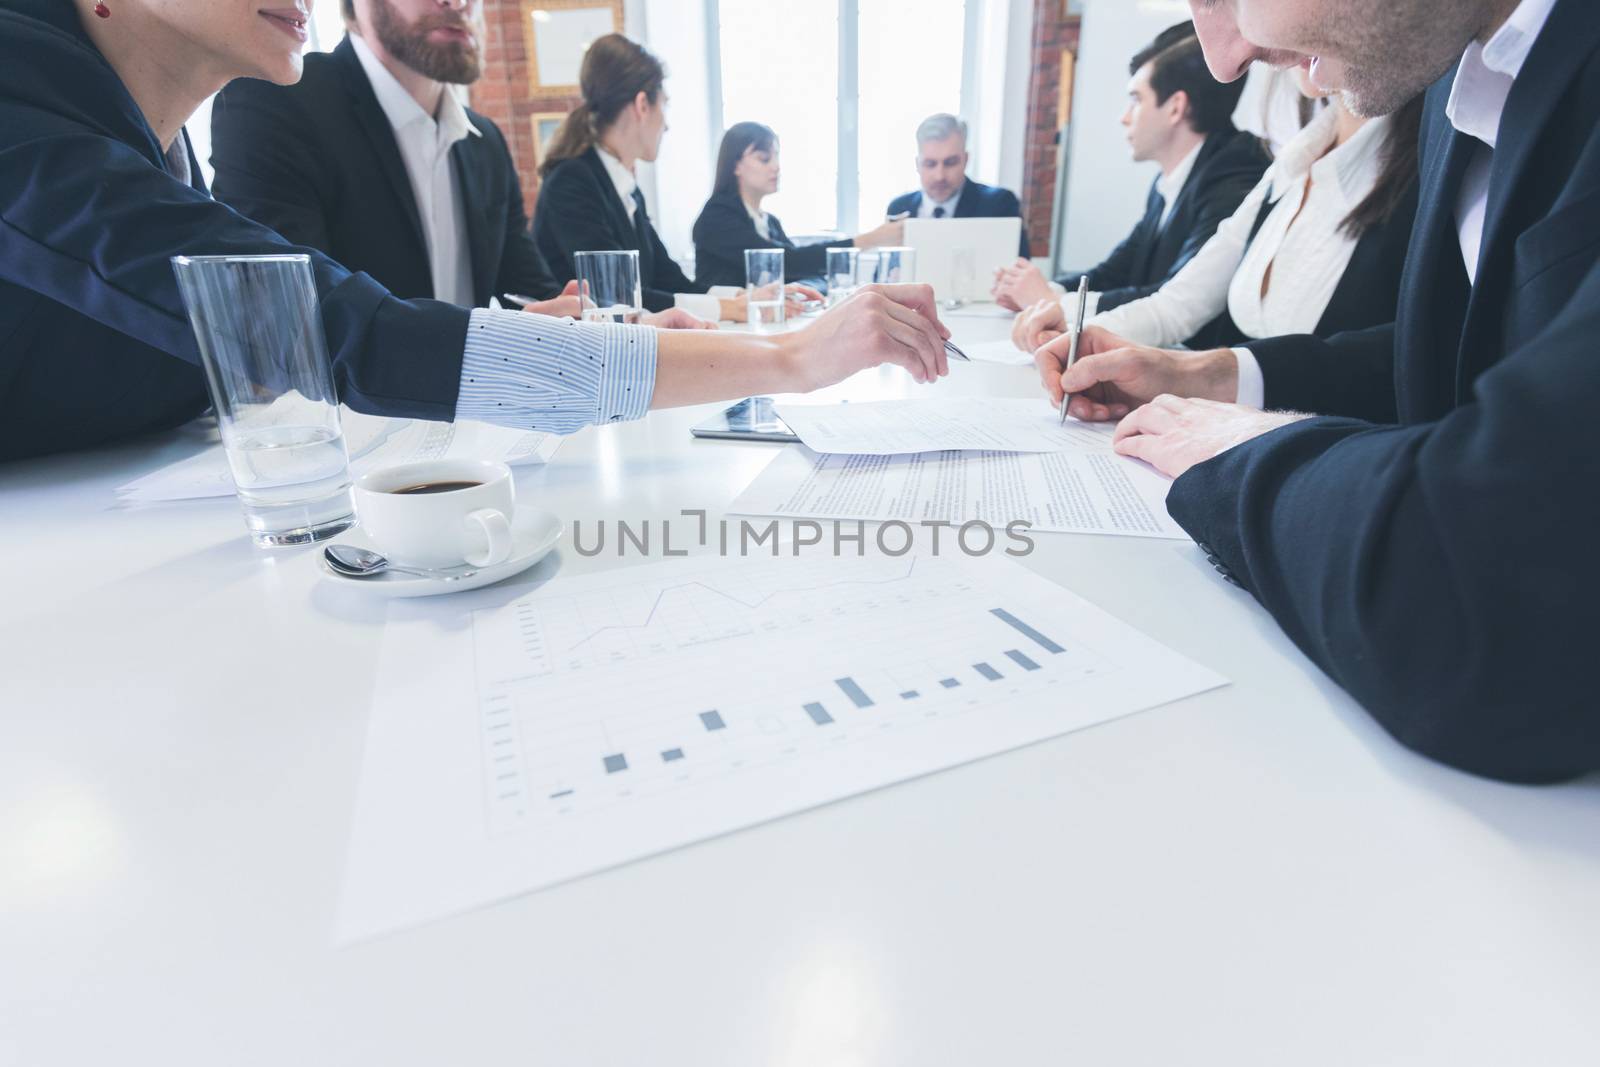 Group of business people in meeting room at office discuss financial reports